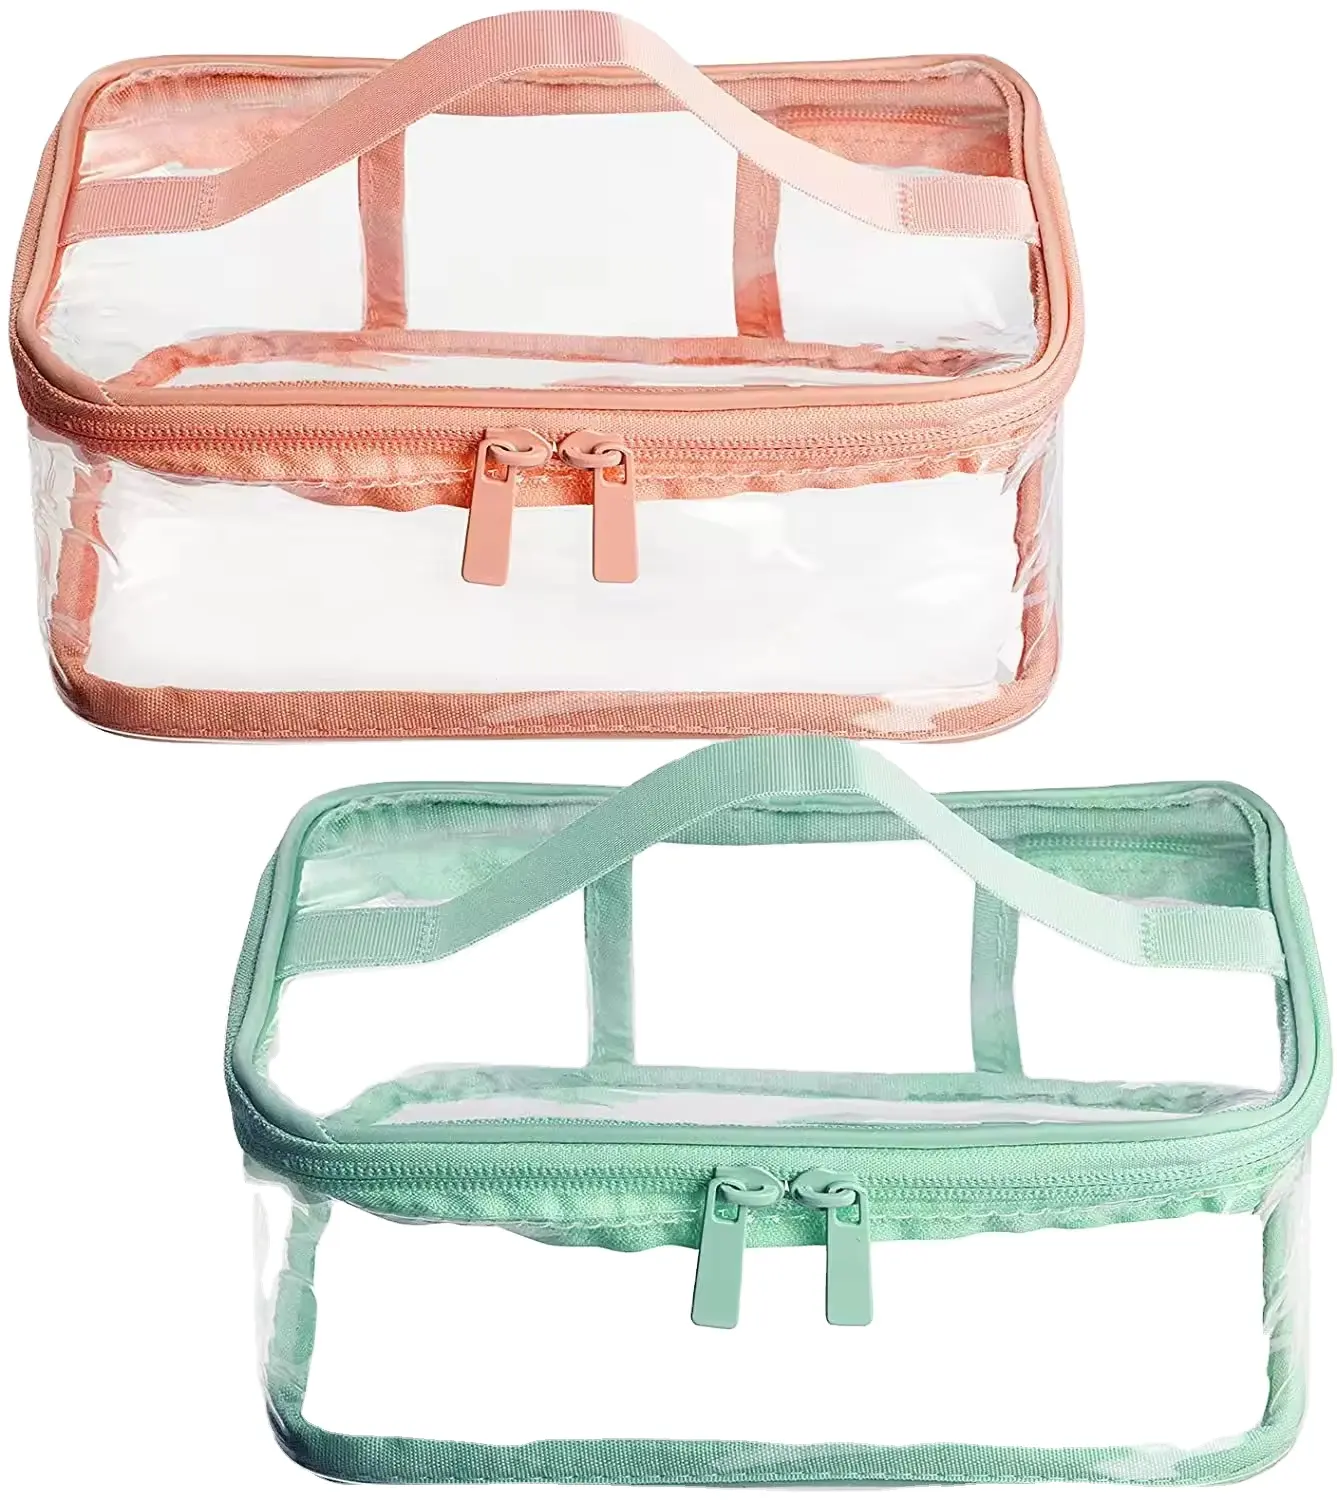 stadium approved clear crossbody bag cosmetic bag with logo printed pvc bag tote